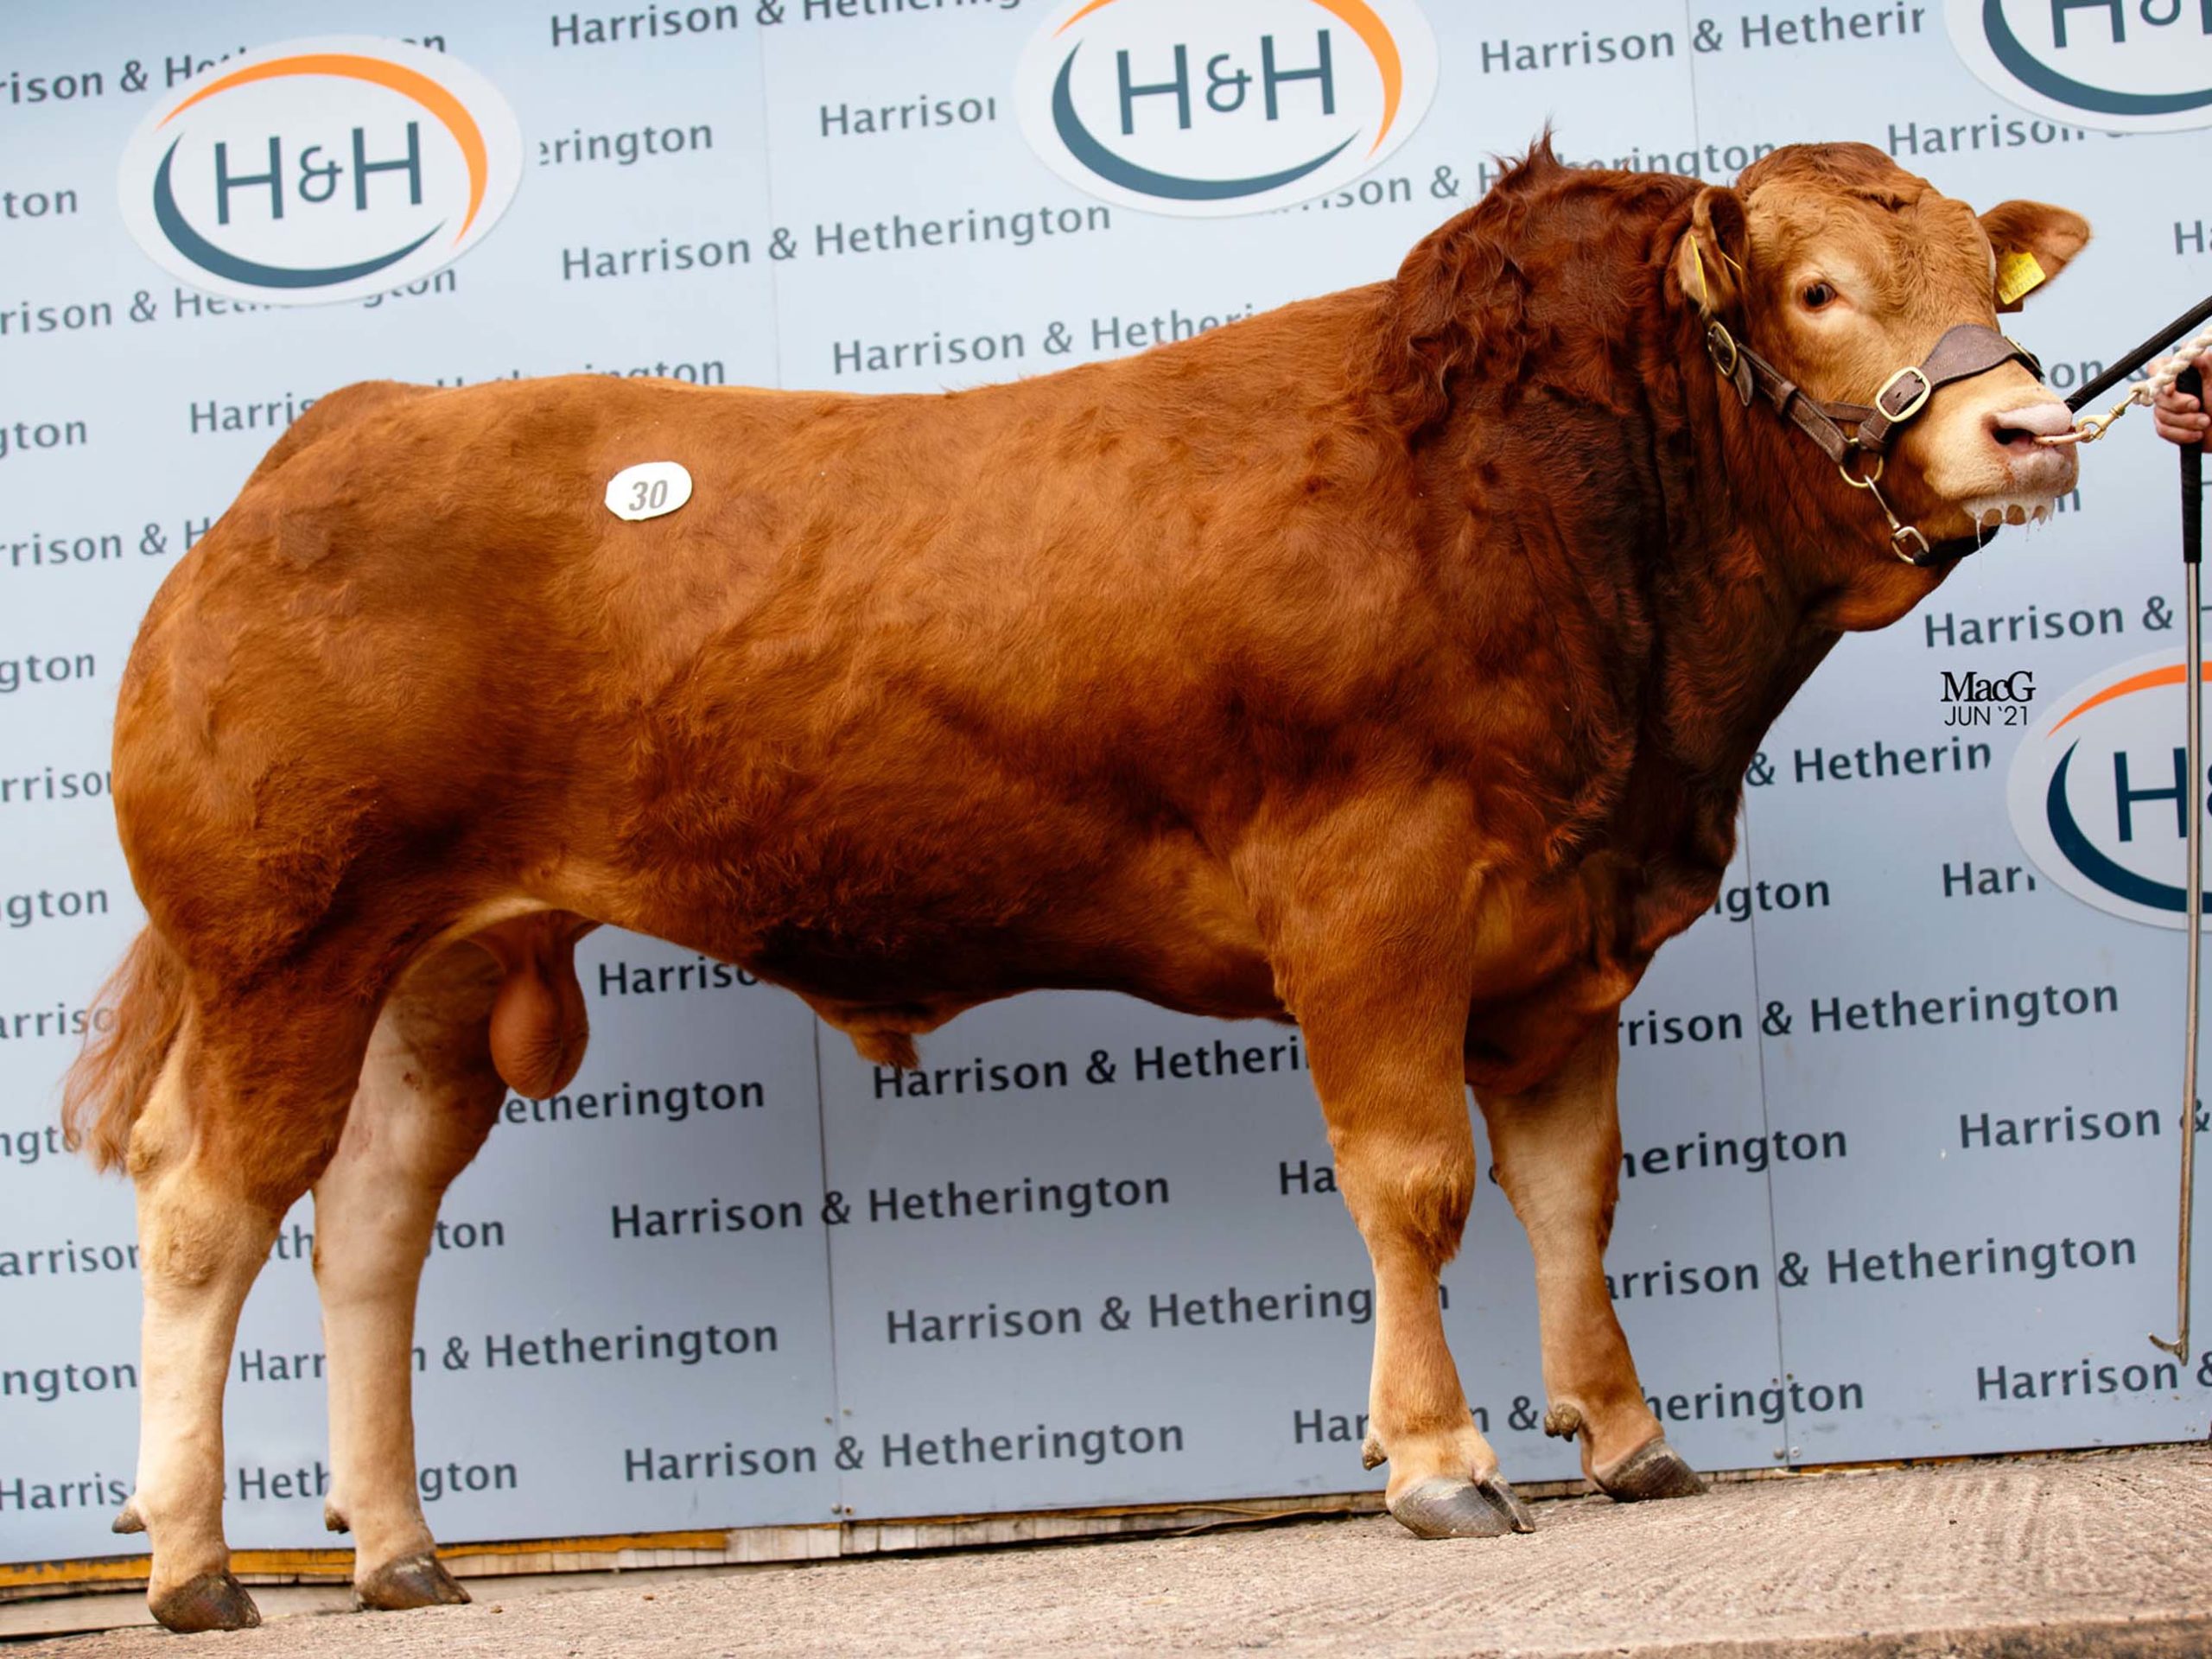 Large male orange cow. Standing in front of Harrison and Hetherington backdrop.